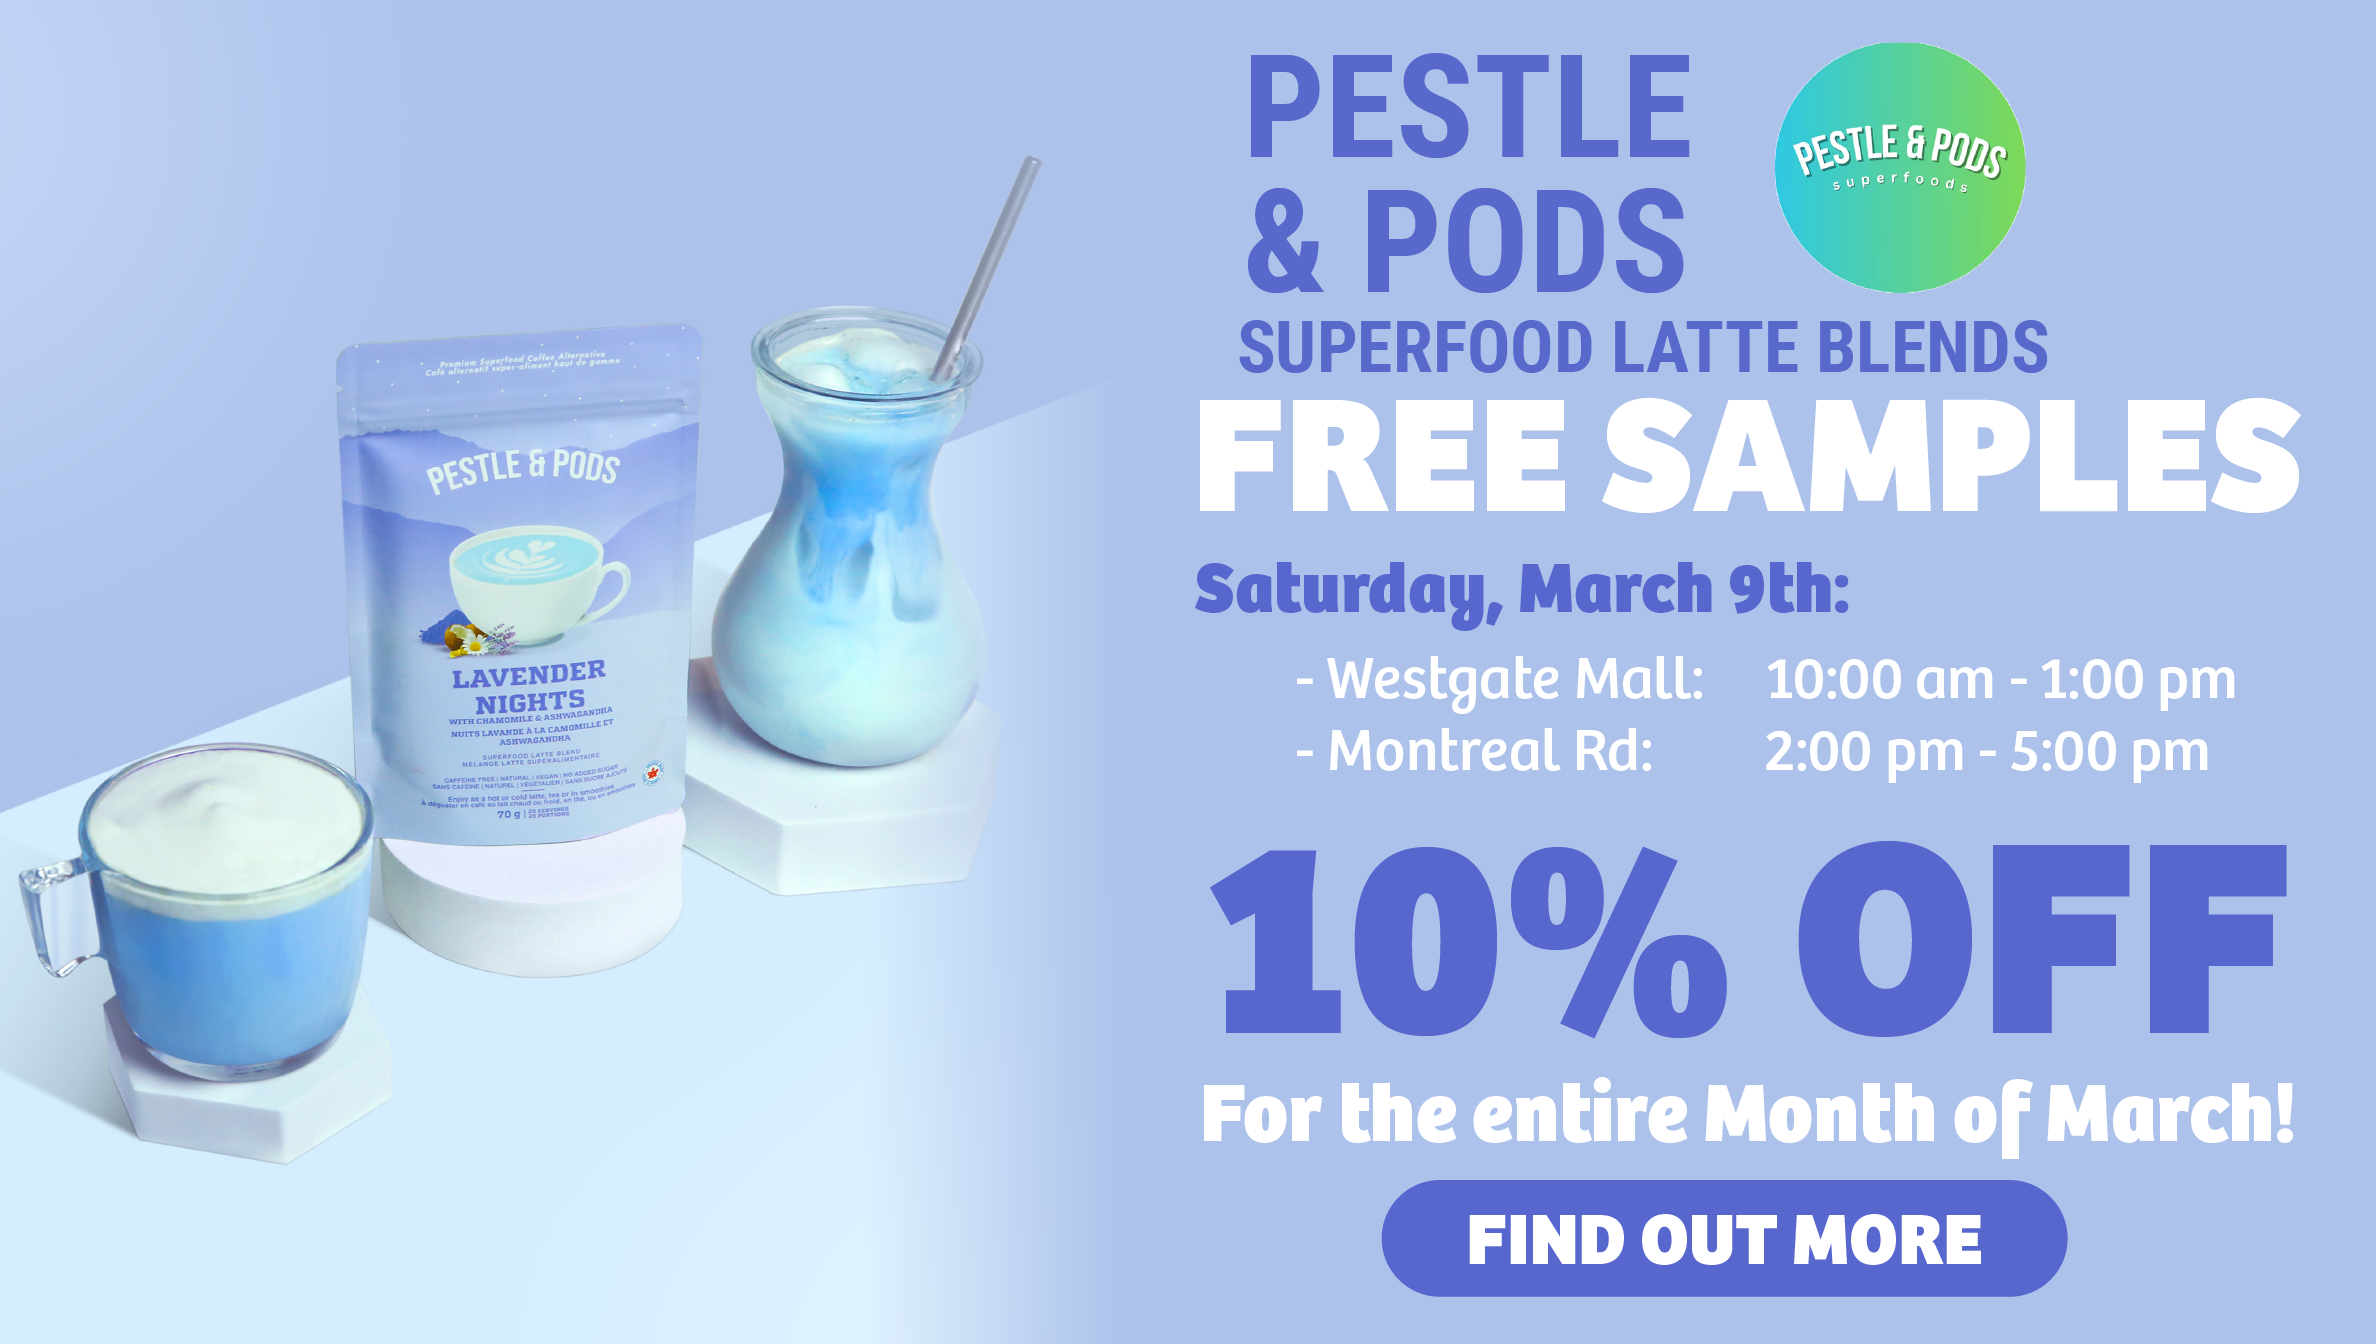 Kardish Health Food Centre is offering Free Samples from Pestle and Pods!